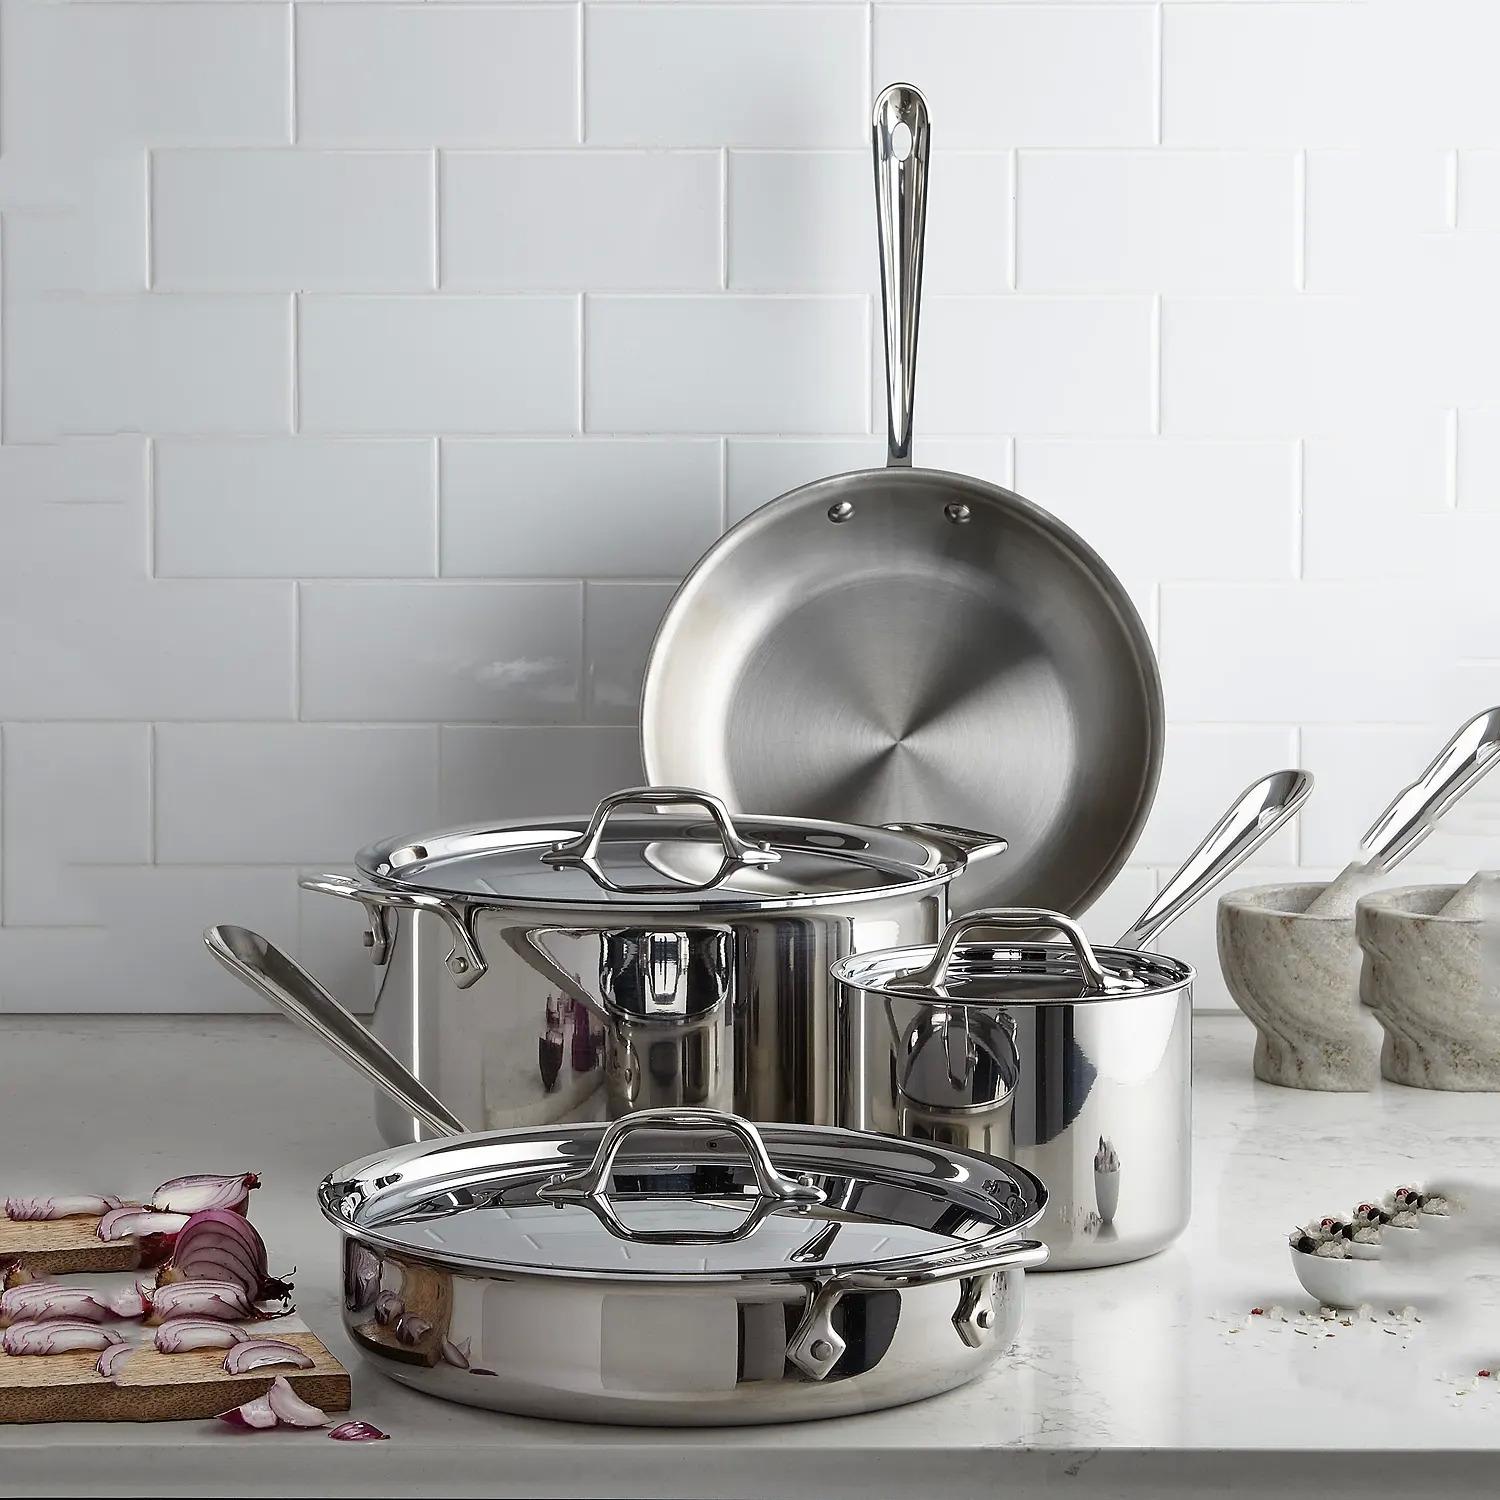 All-Clad Stainless Steel Cookware Set for $299.99 Shipped